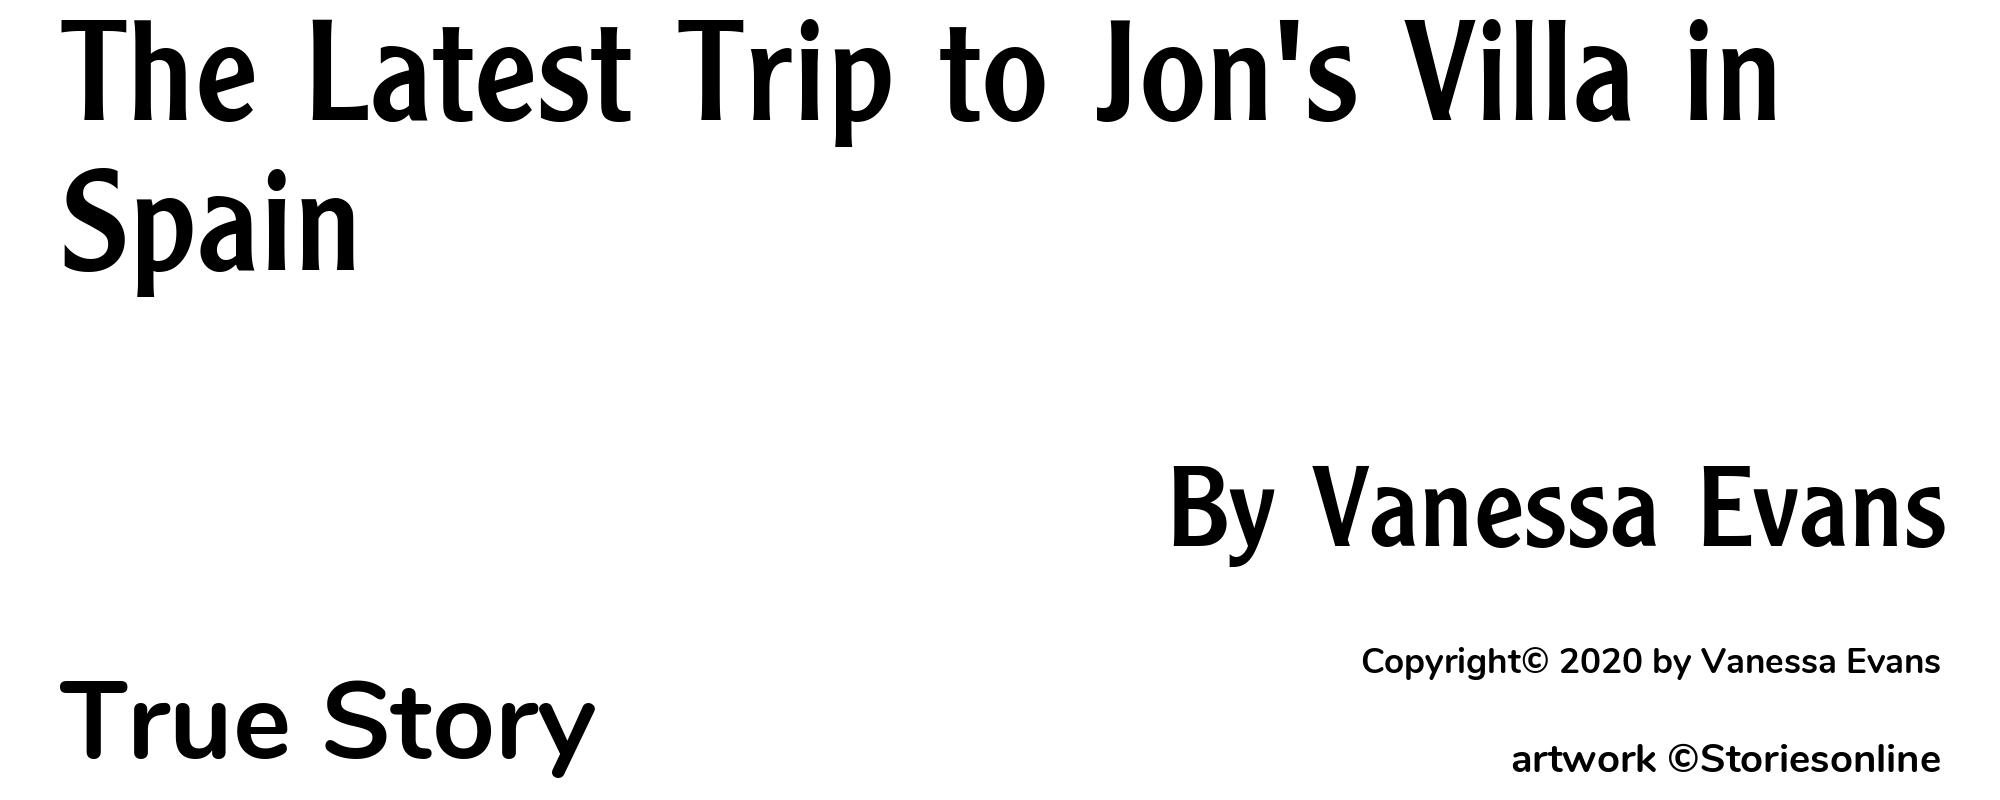 The Latest Trip to Jon's Villa in Spain - Cover